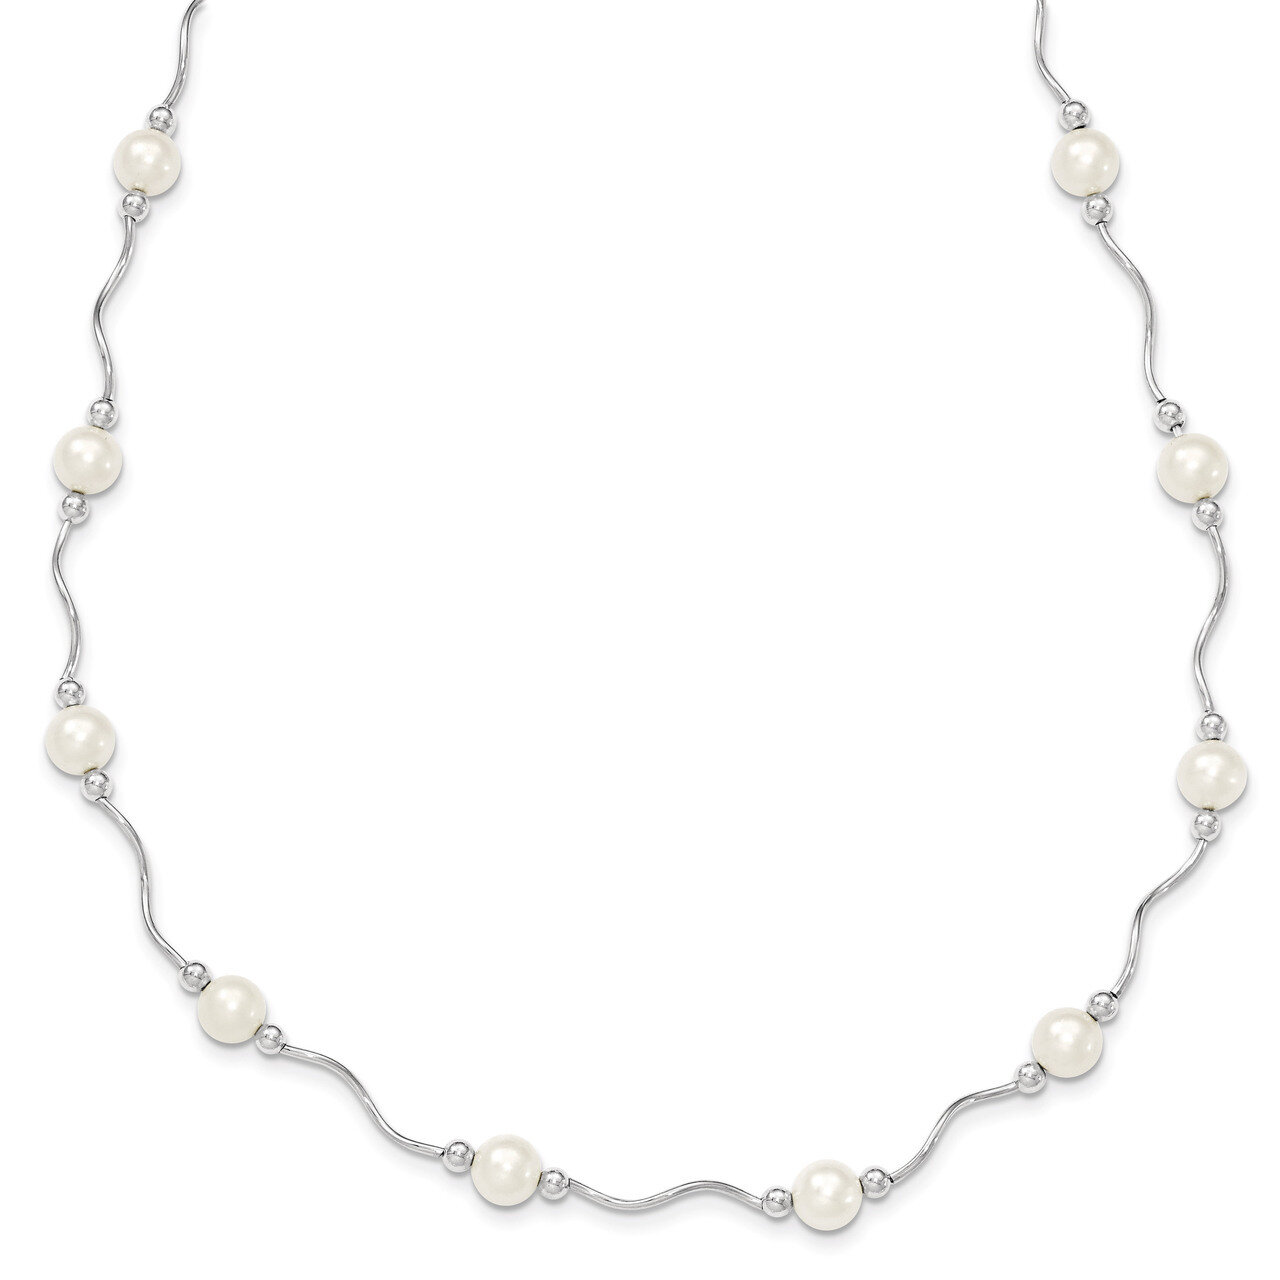 6-7mm White Fresh Water Cultured Pearl Necklace Sterling Silver QH4731-18